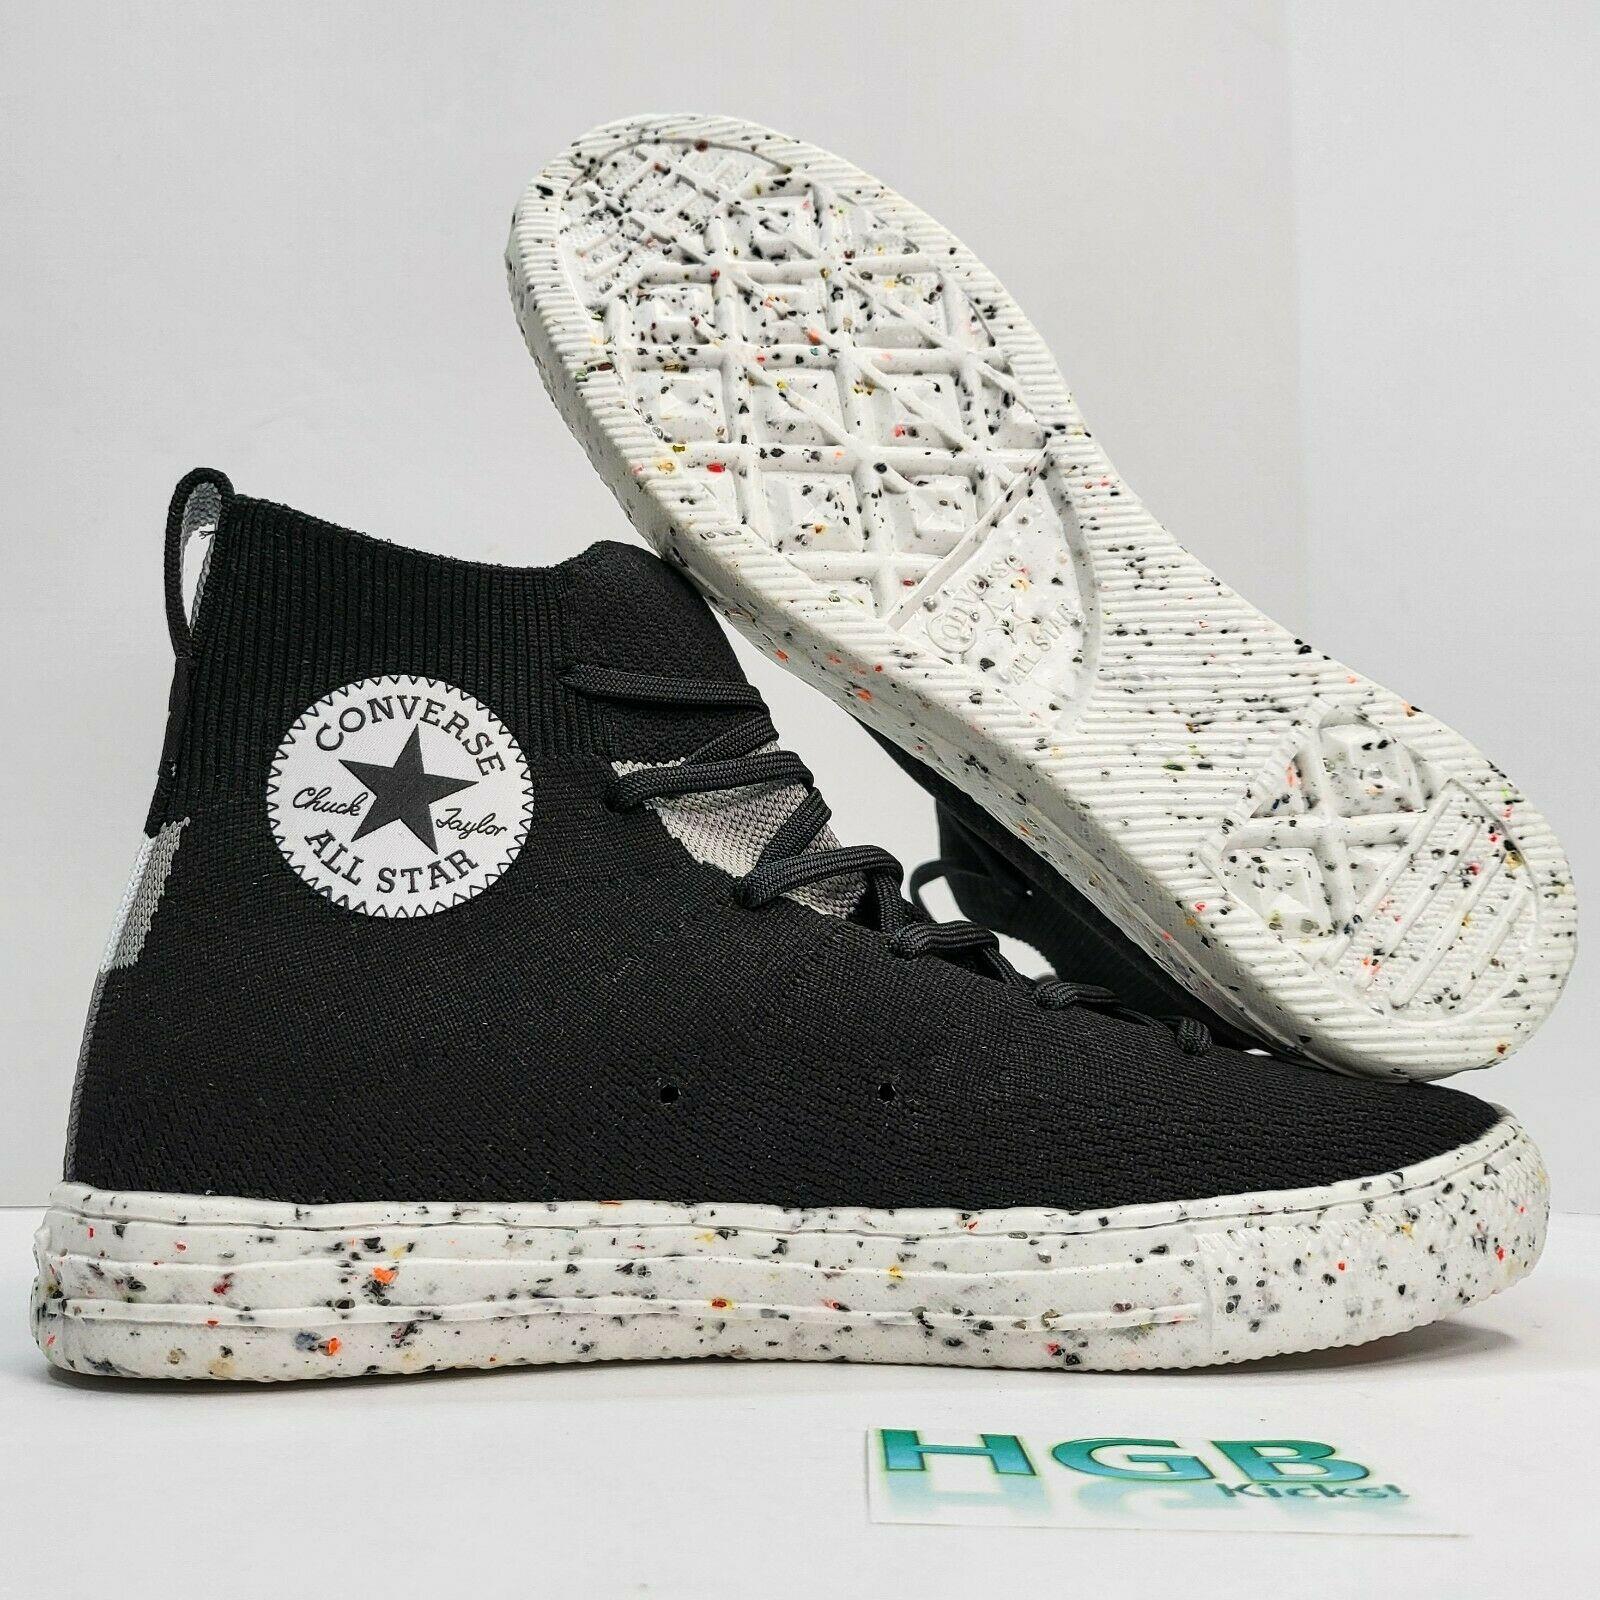 Converse Chuck Taylor All Star Crater Knit Hi Men`s Sneaker Shoe Limited 170868C